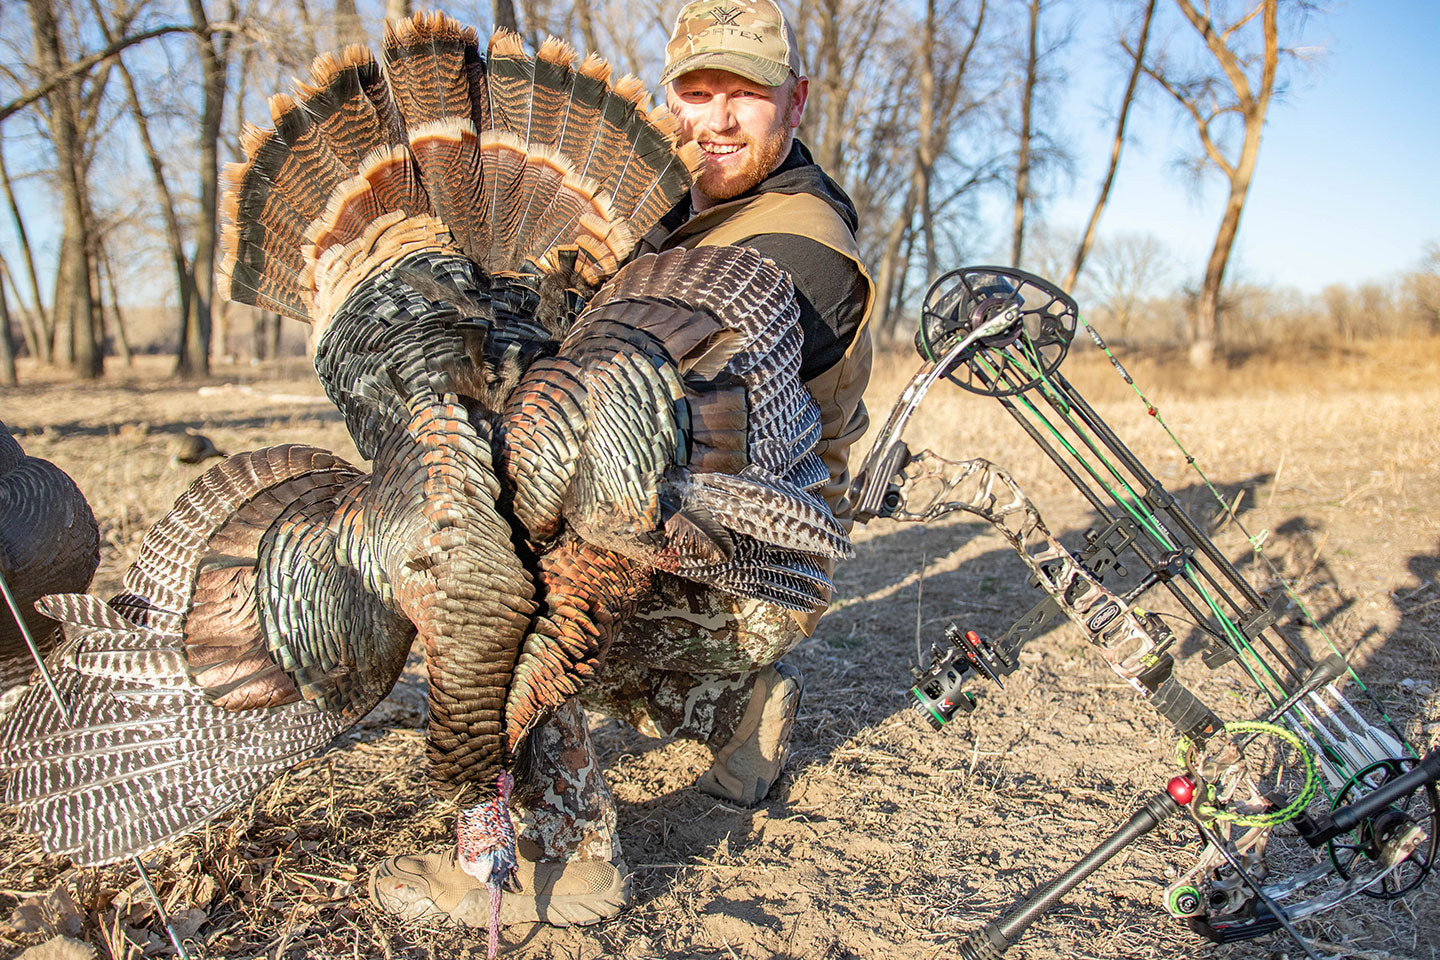 Watch - The First Turkey Taken with Redline Bowhunting Accessories!